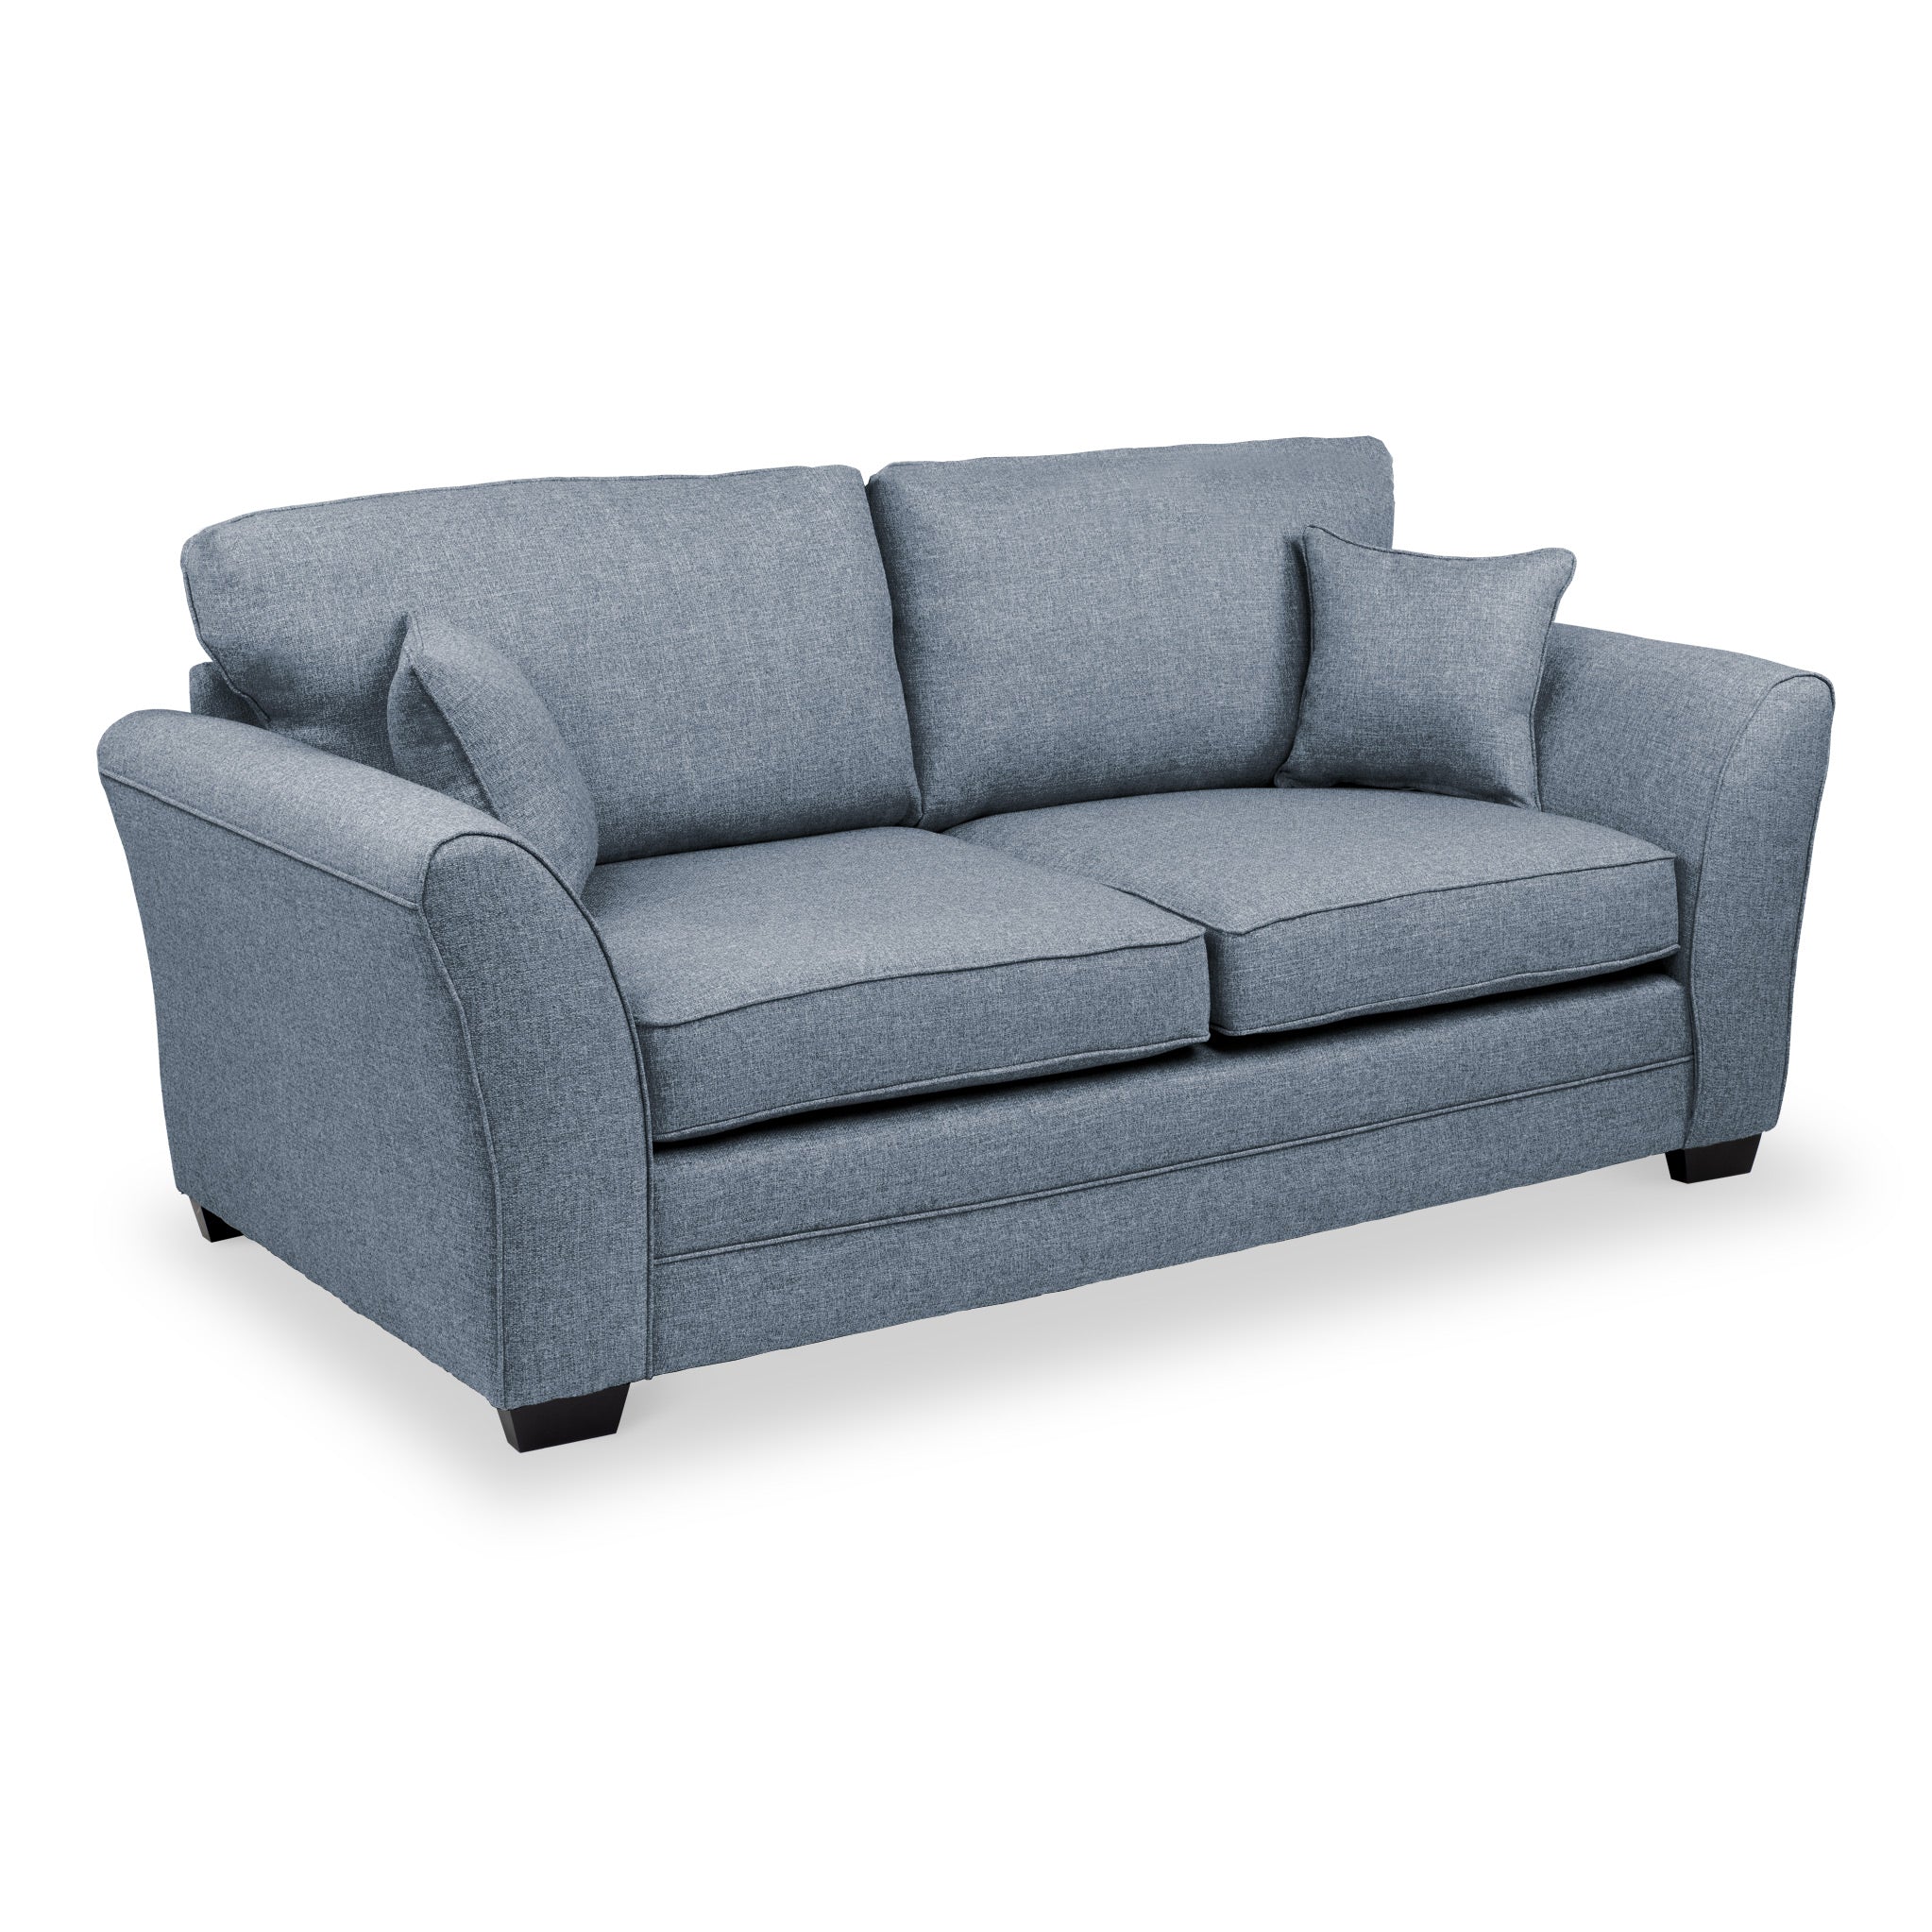 What Is A Chesterfield Sofa? - Chesterfield Sofa Style